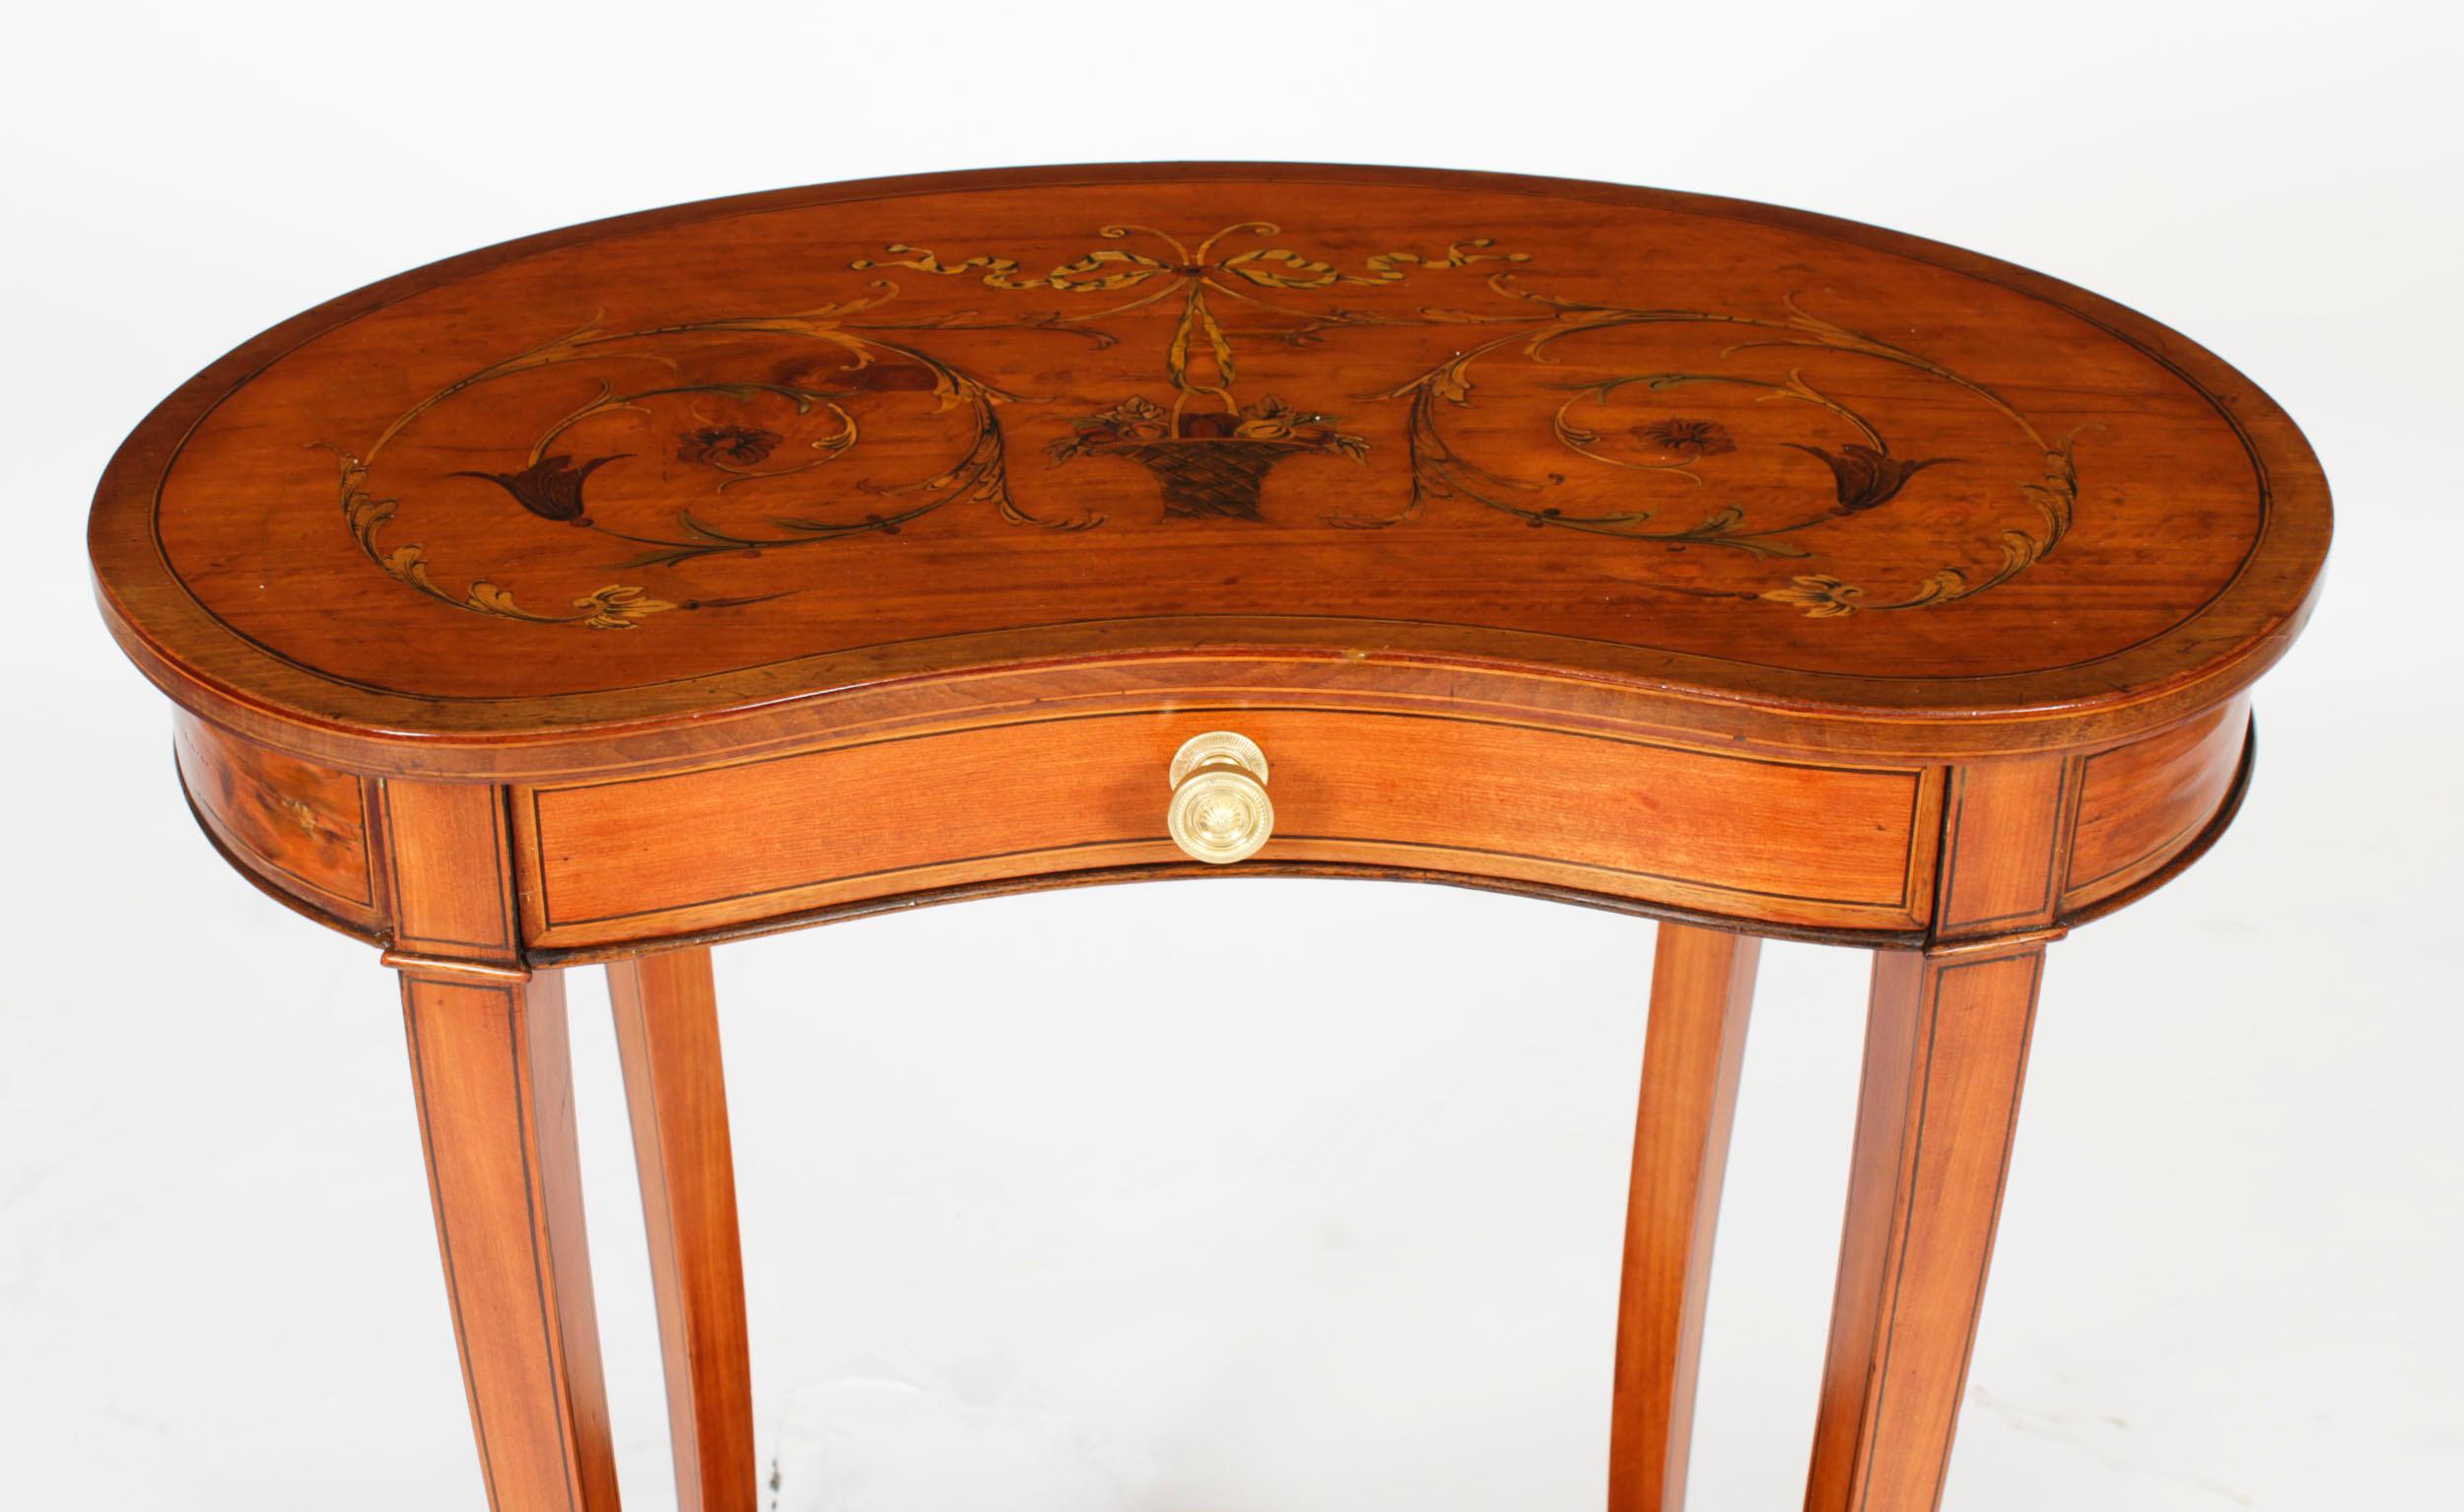 Satinwood Antique English Marquetry Kidney Shaped Occasionally Tables 19th Century For Sale